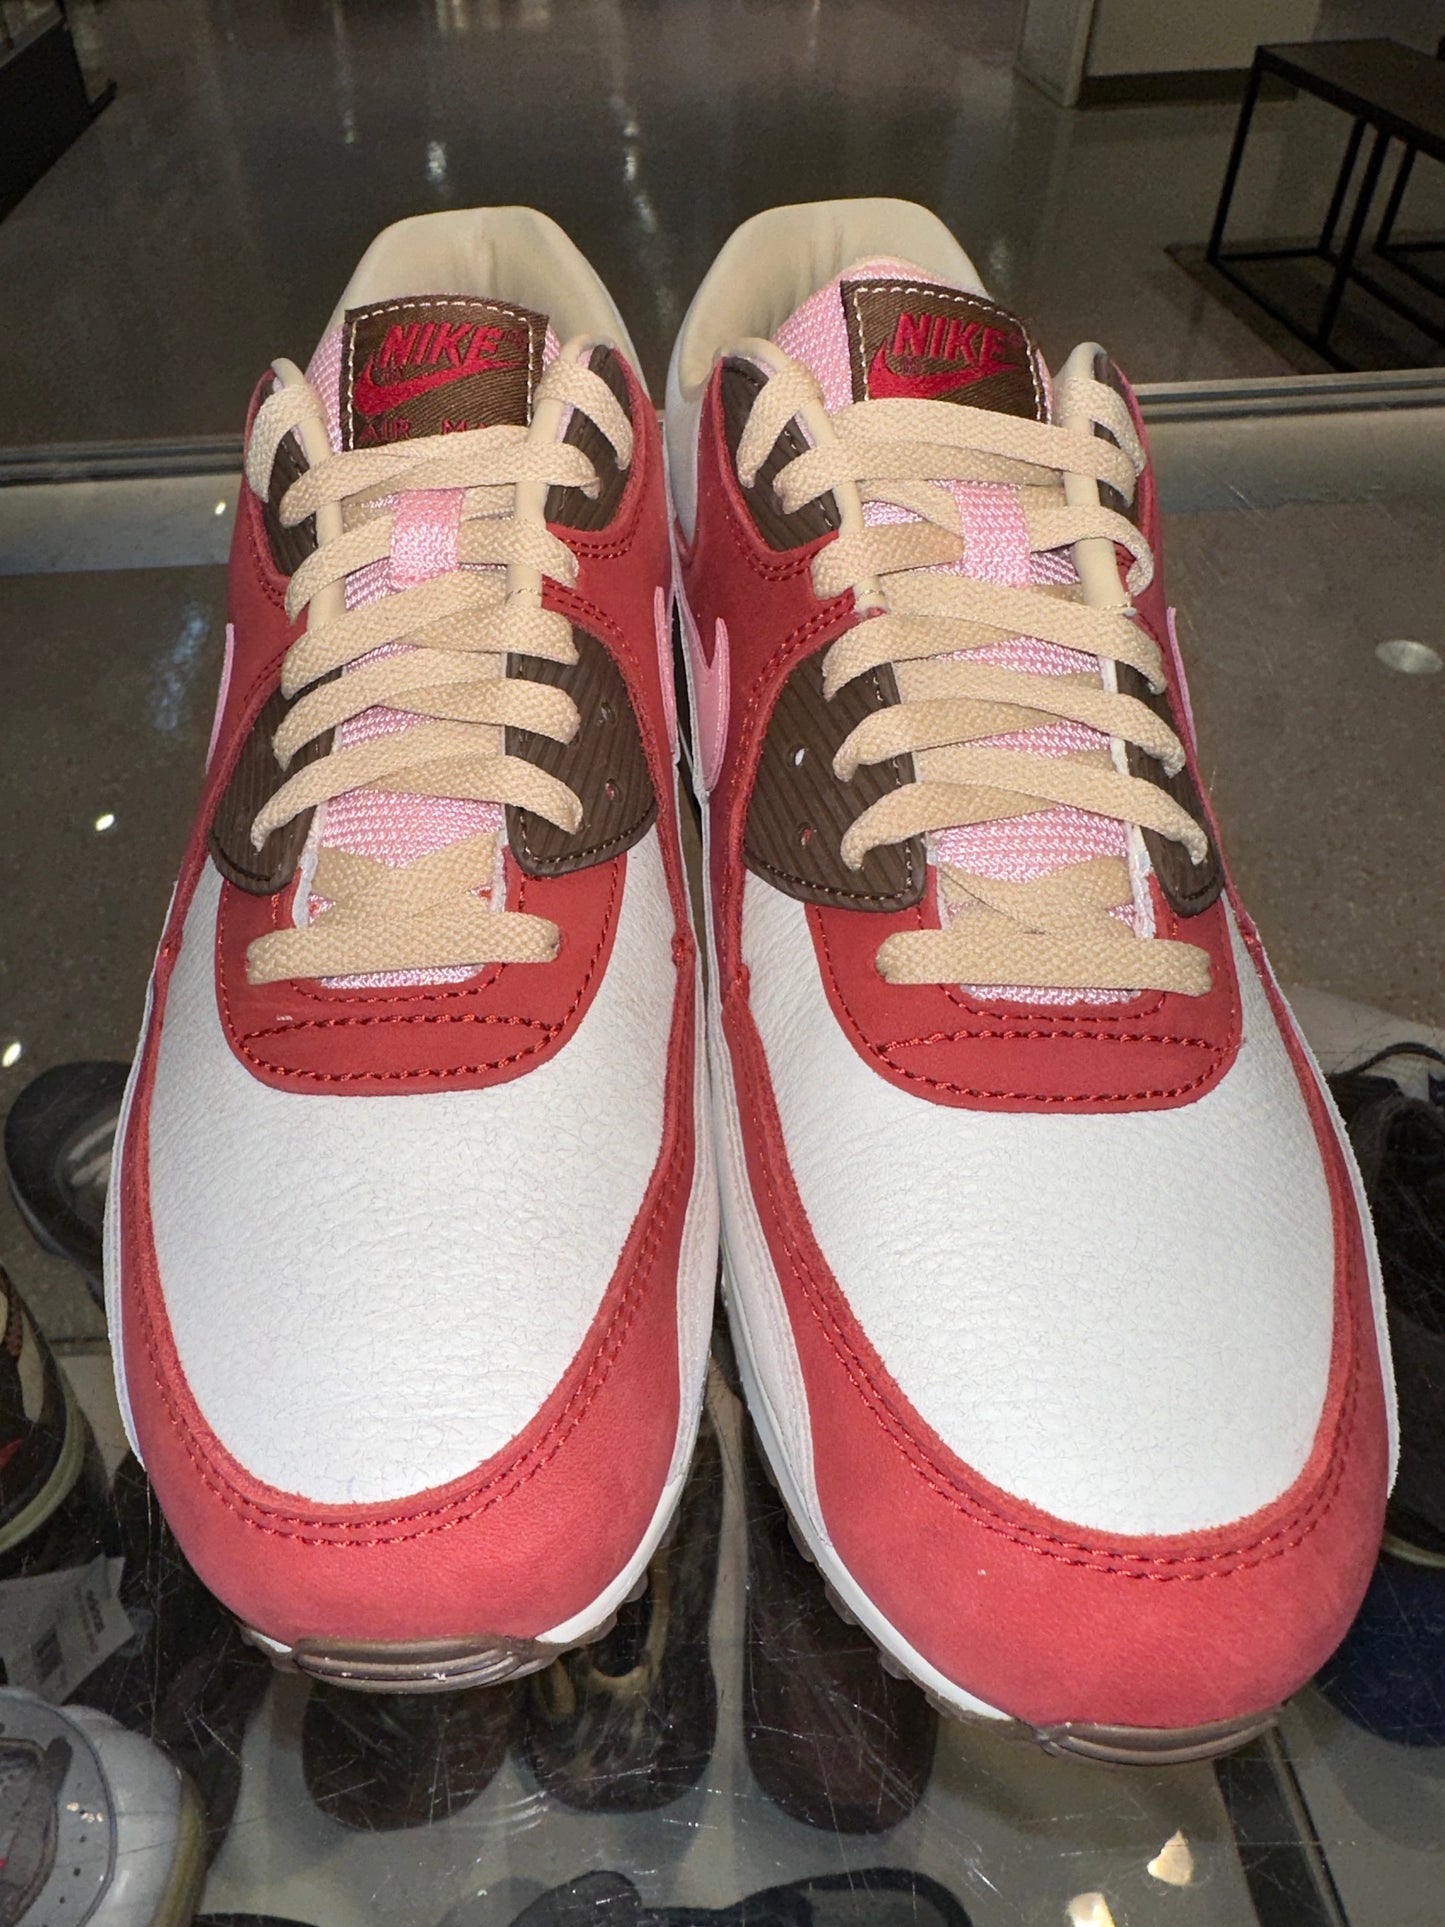 Size 11 Air Max 90 “Bacon” Brand New (Mall)